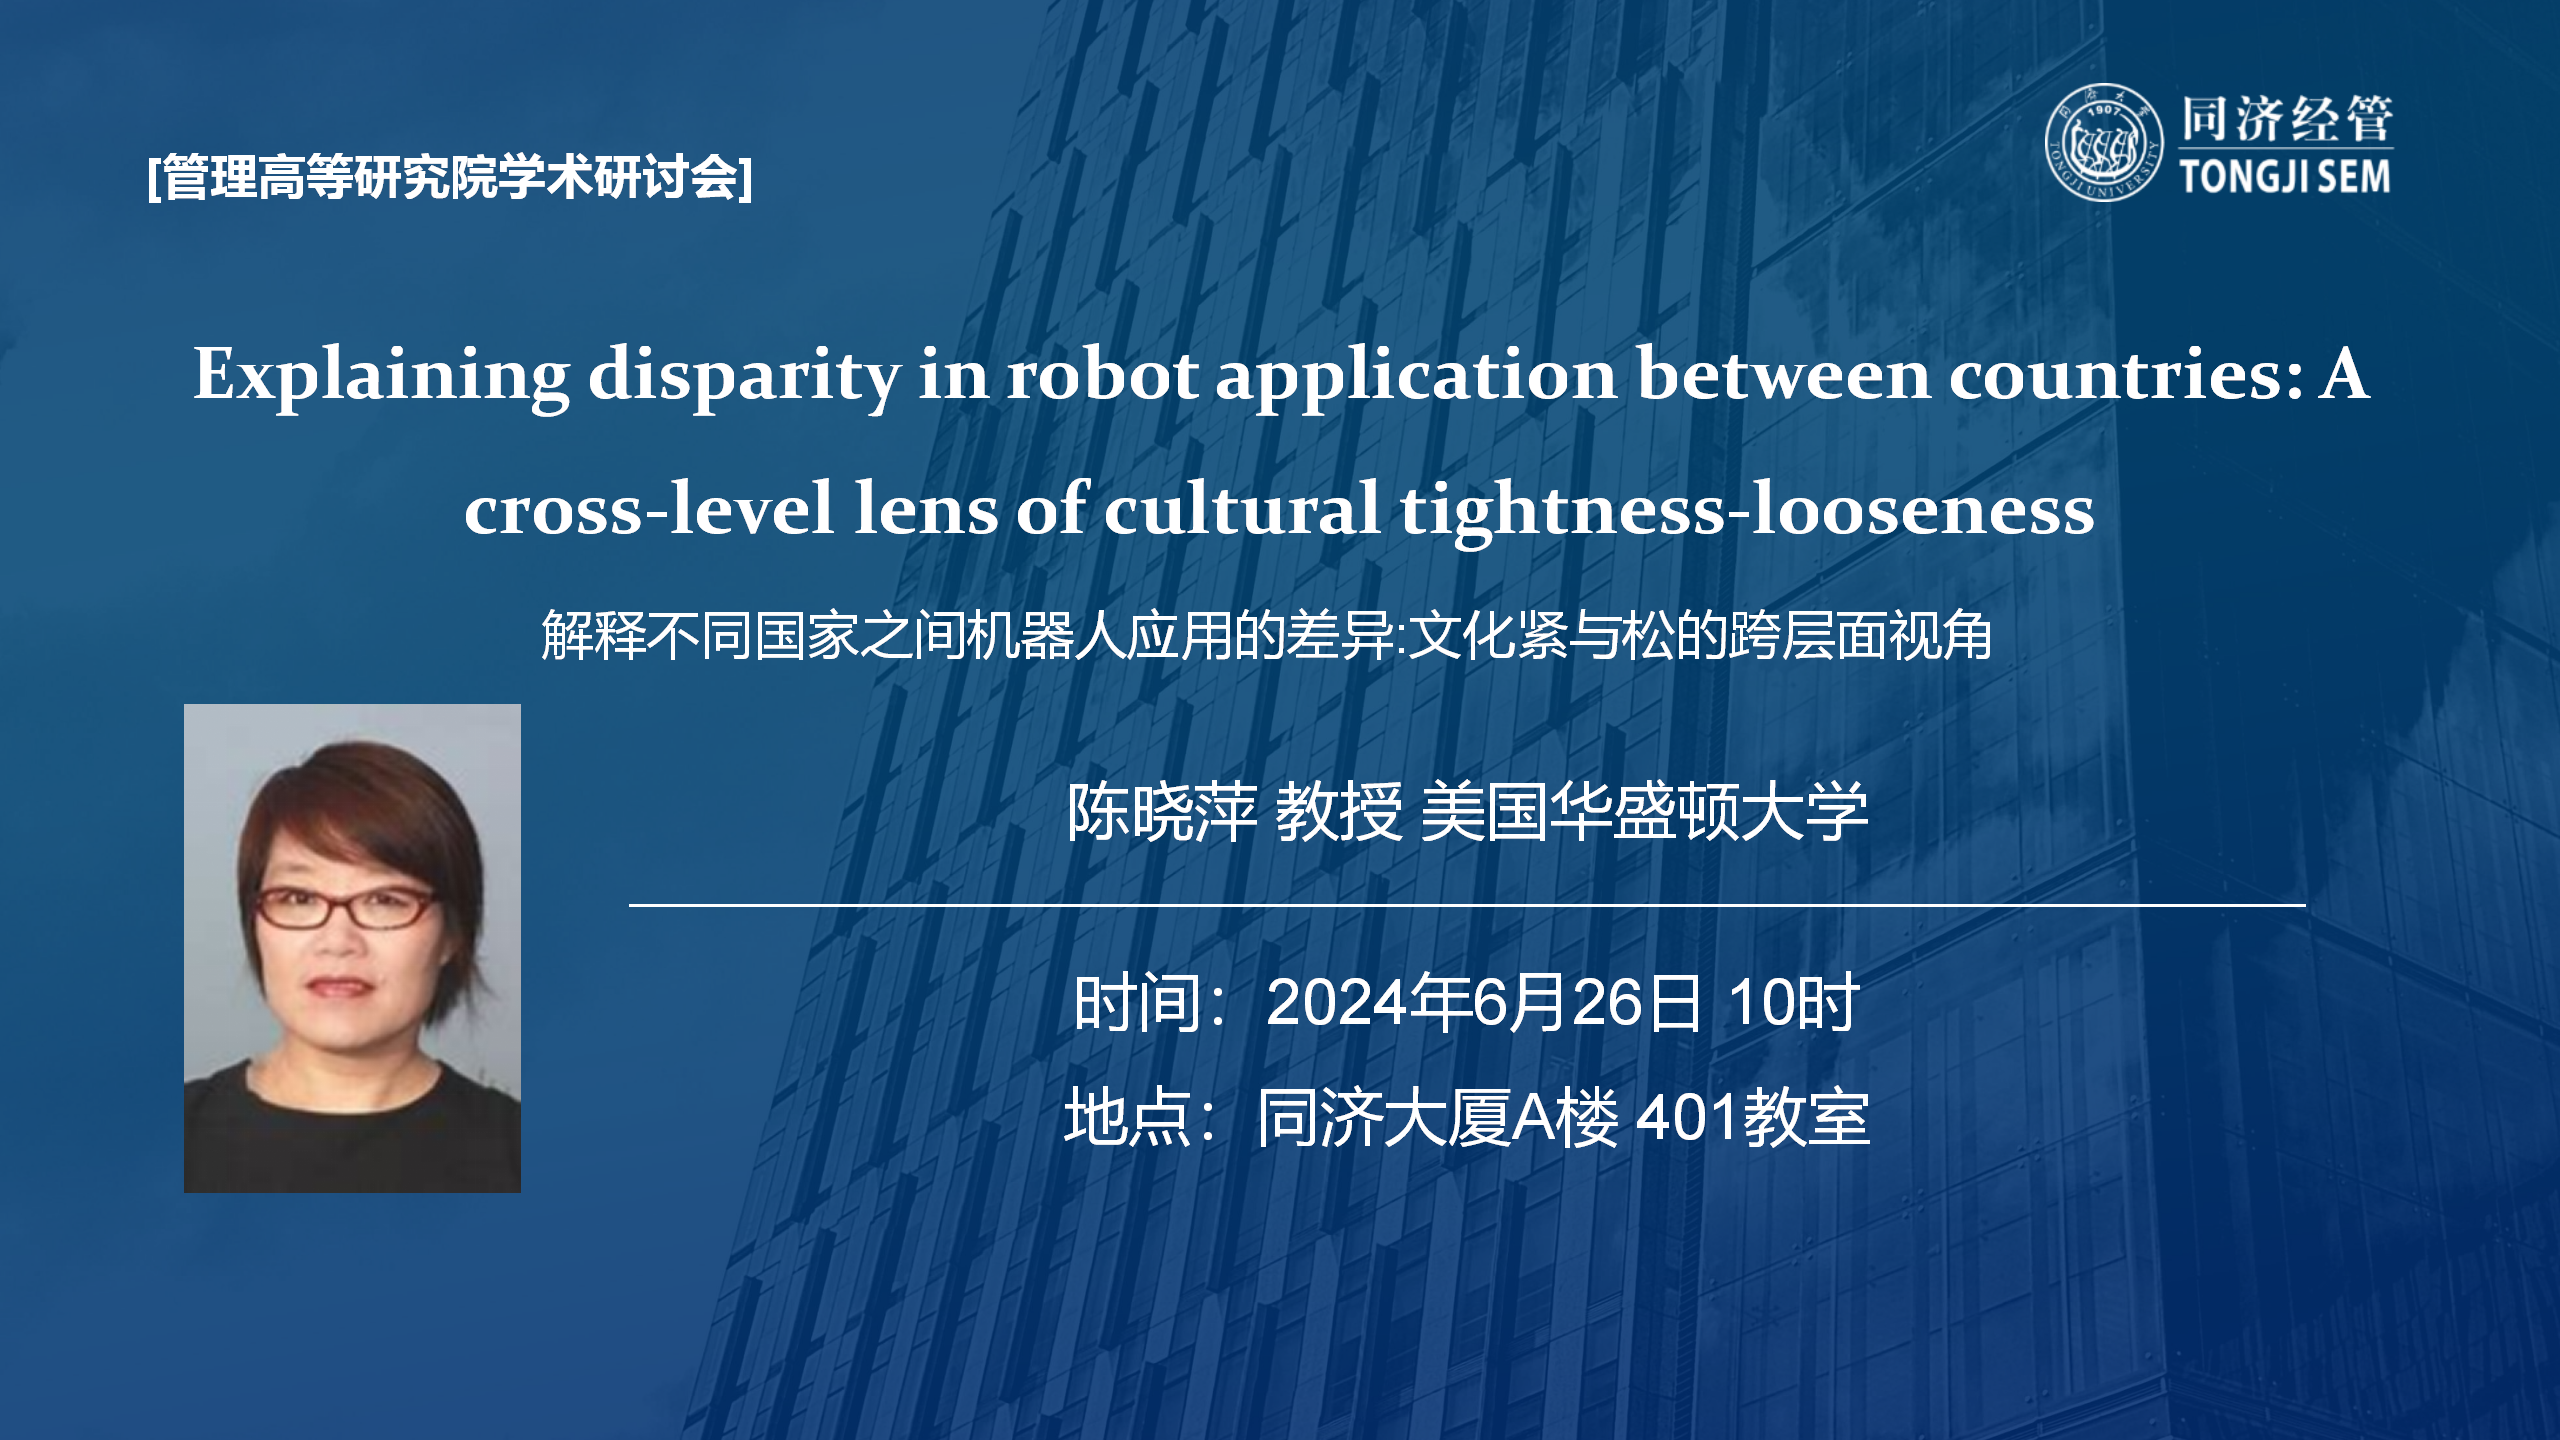 Explaining disparity in robot application between countries: A cross-level lens of cultural tightness-looseness